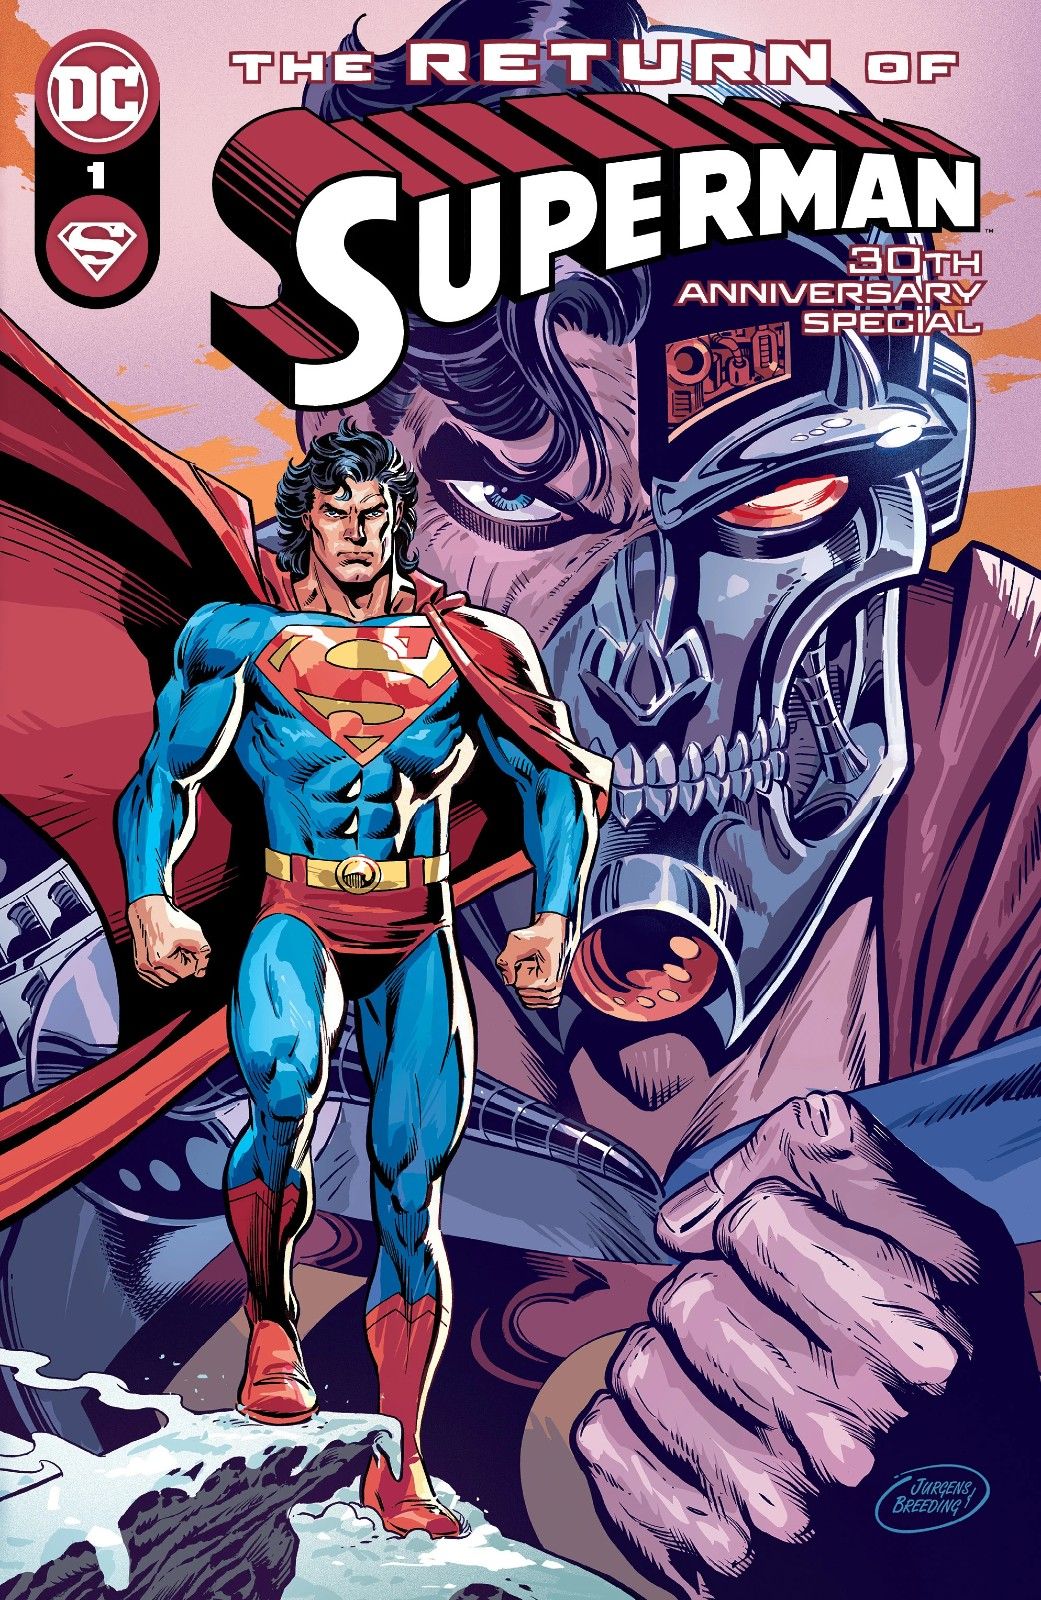 Superman and Cyborg Superman in The Return of Superman 30th Anniversary Special #1